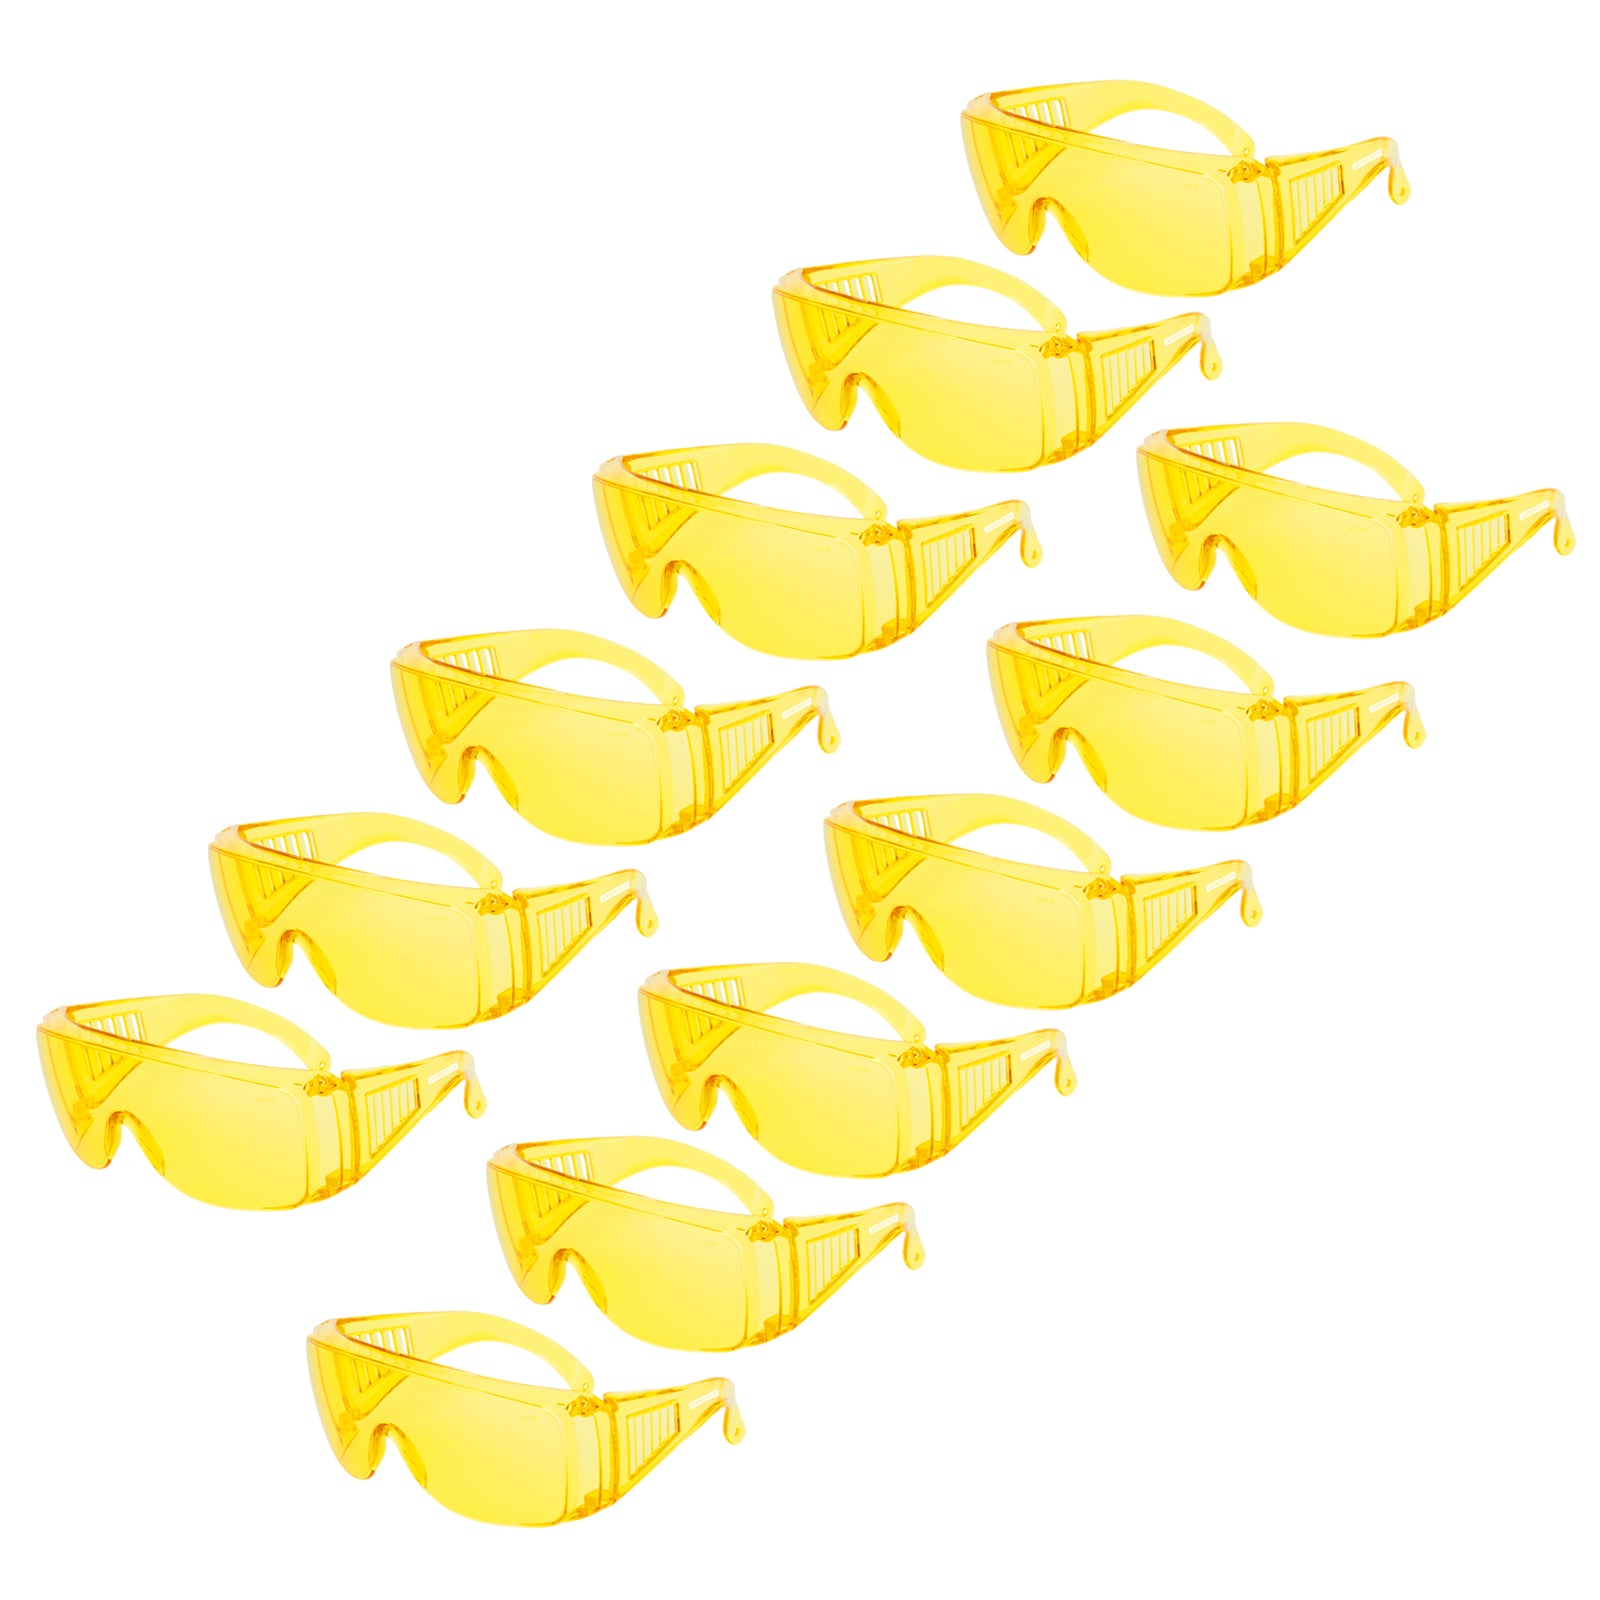 pack of 12 yellow Jorestech safety over glasses for high impact protection 